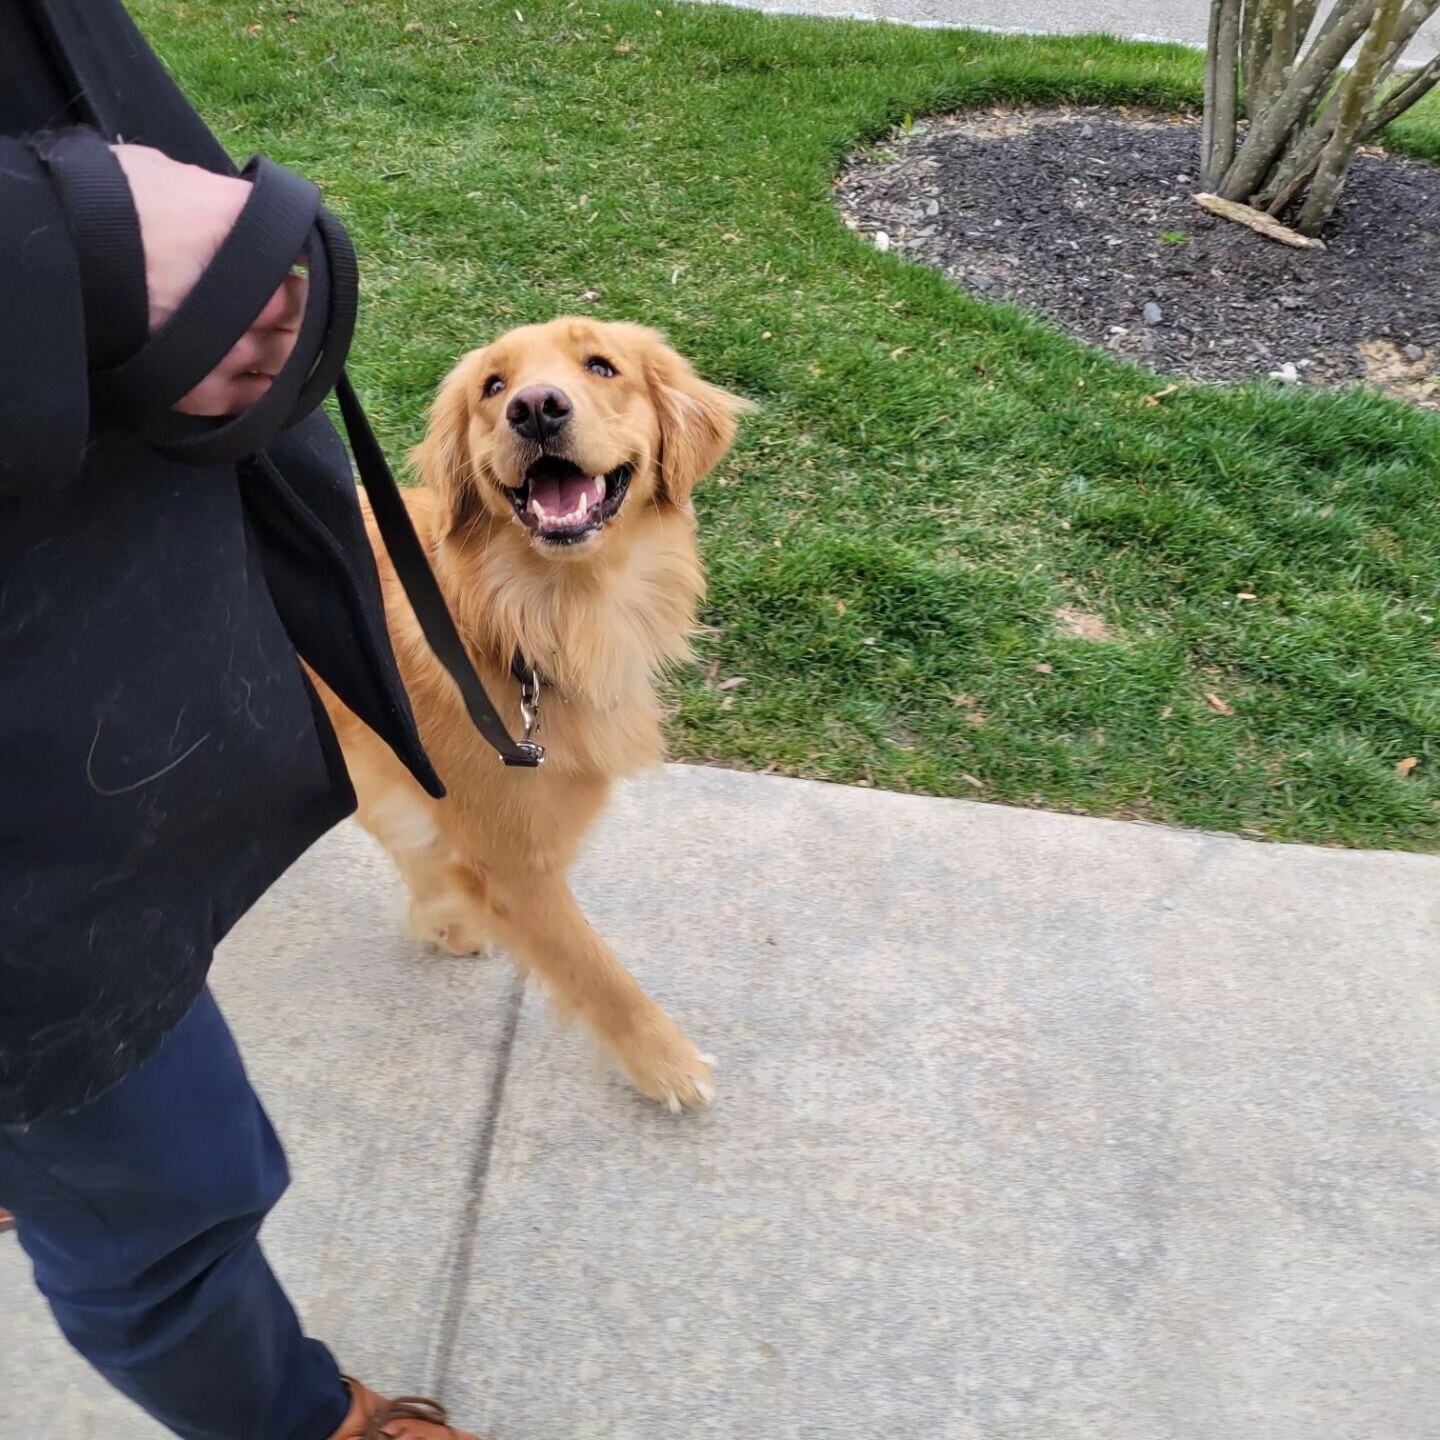 Seriously though, this dog Nala... Seriously. 💛
.
.
.
#goldenretriever #goldenretrieveroftheday #friskyinphikky #clickertraineddog #phillydogs #bestpets #bestpups #dogtraining #doggoals #golden #215dogs #dogtrainerlife #sweetdogs #phillypetbusinesse